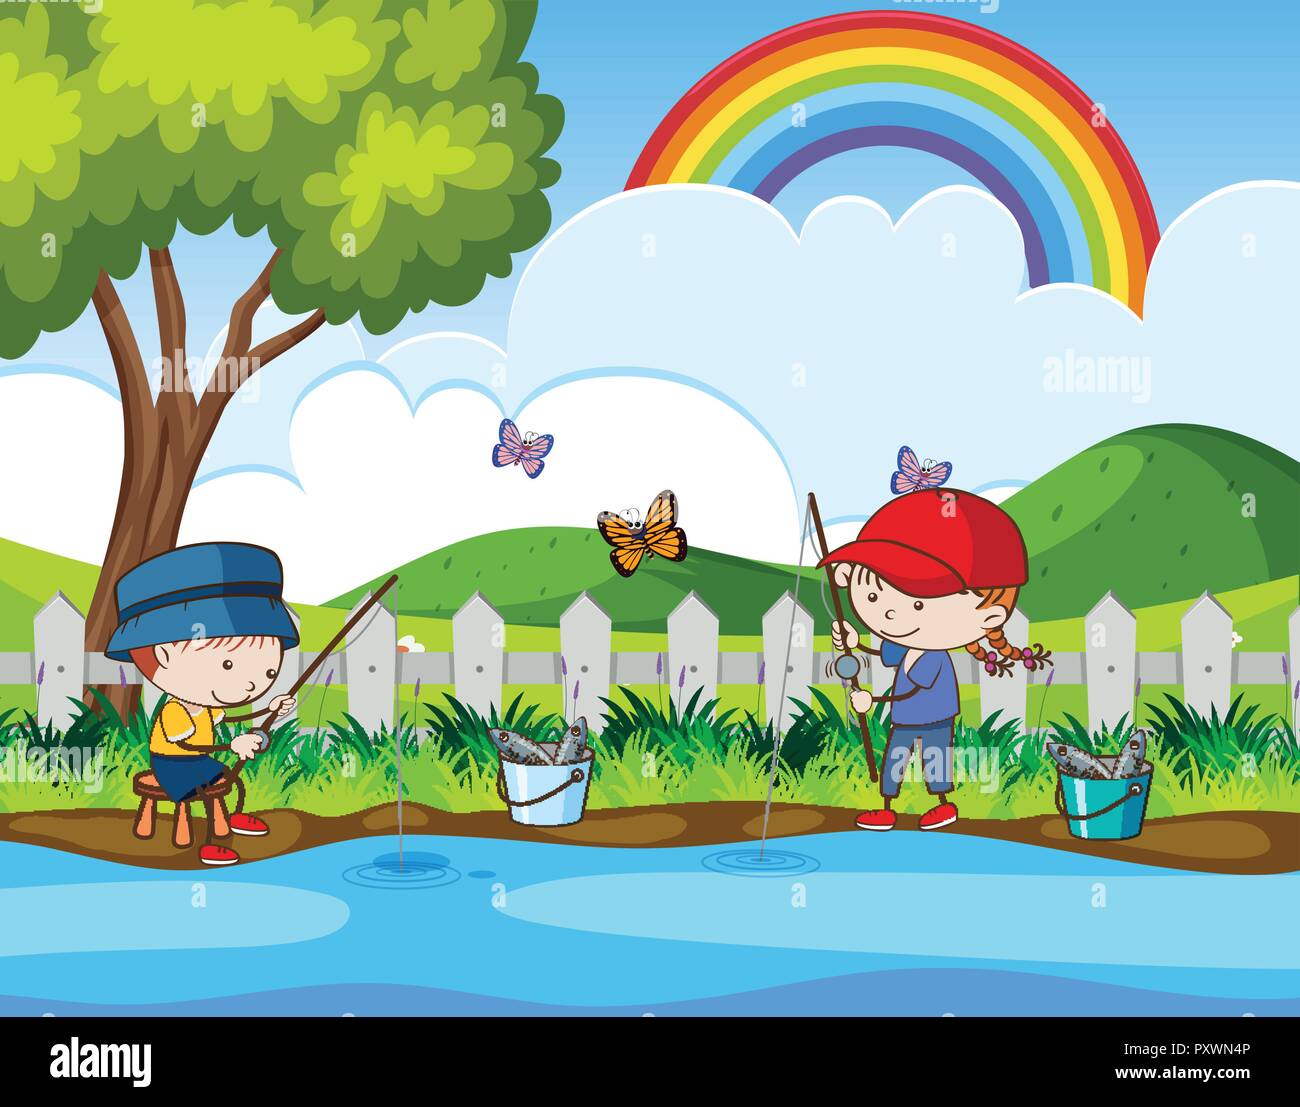 Doodle Kids Fishing in the River illustration Stock Vector Image